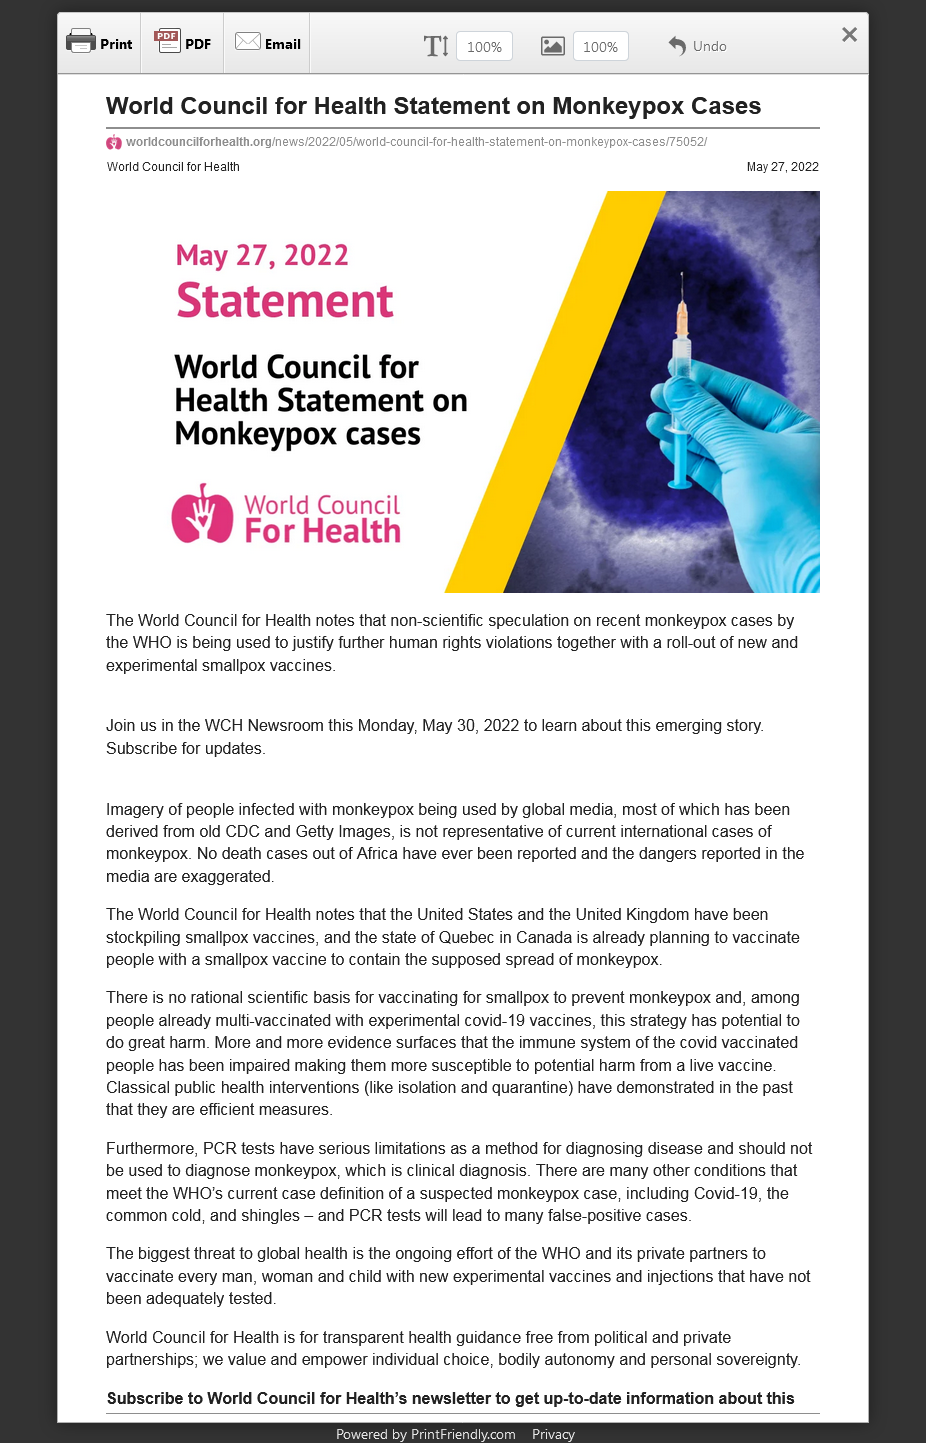 World Council for Health Statement on Monkeypox Cases